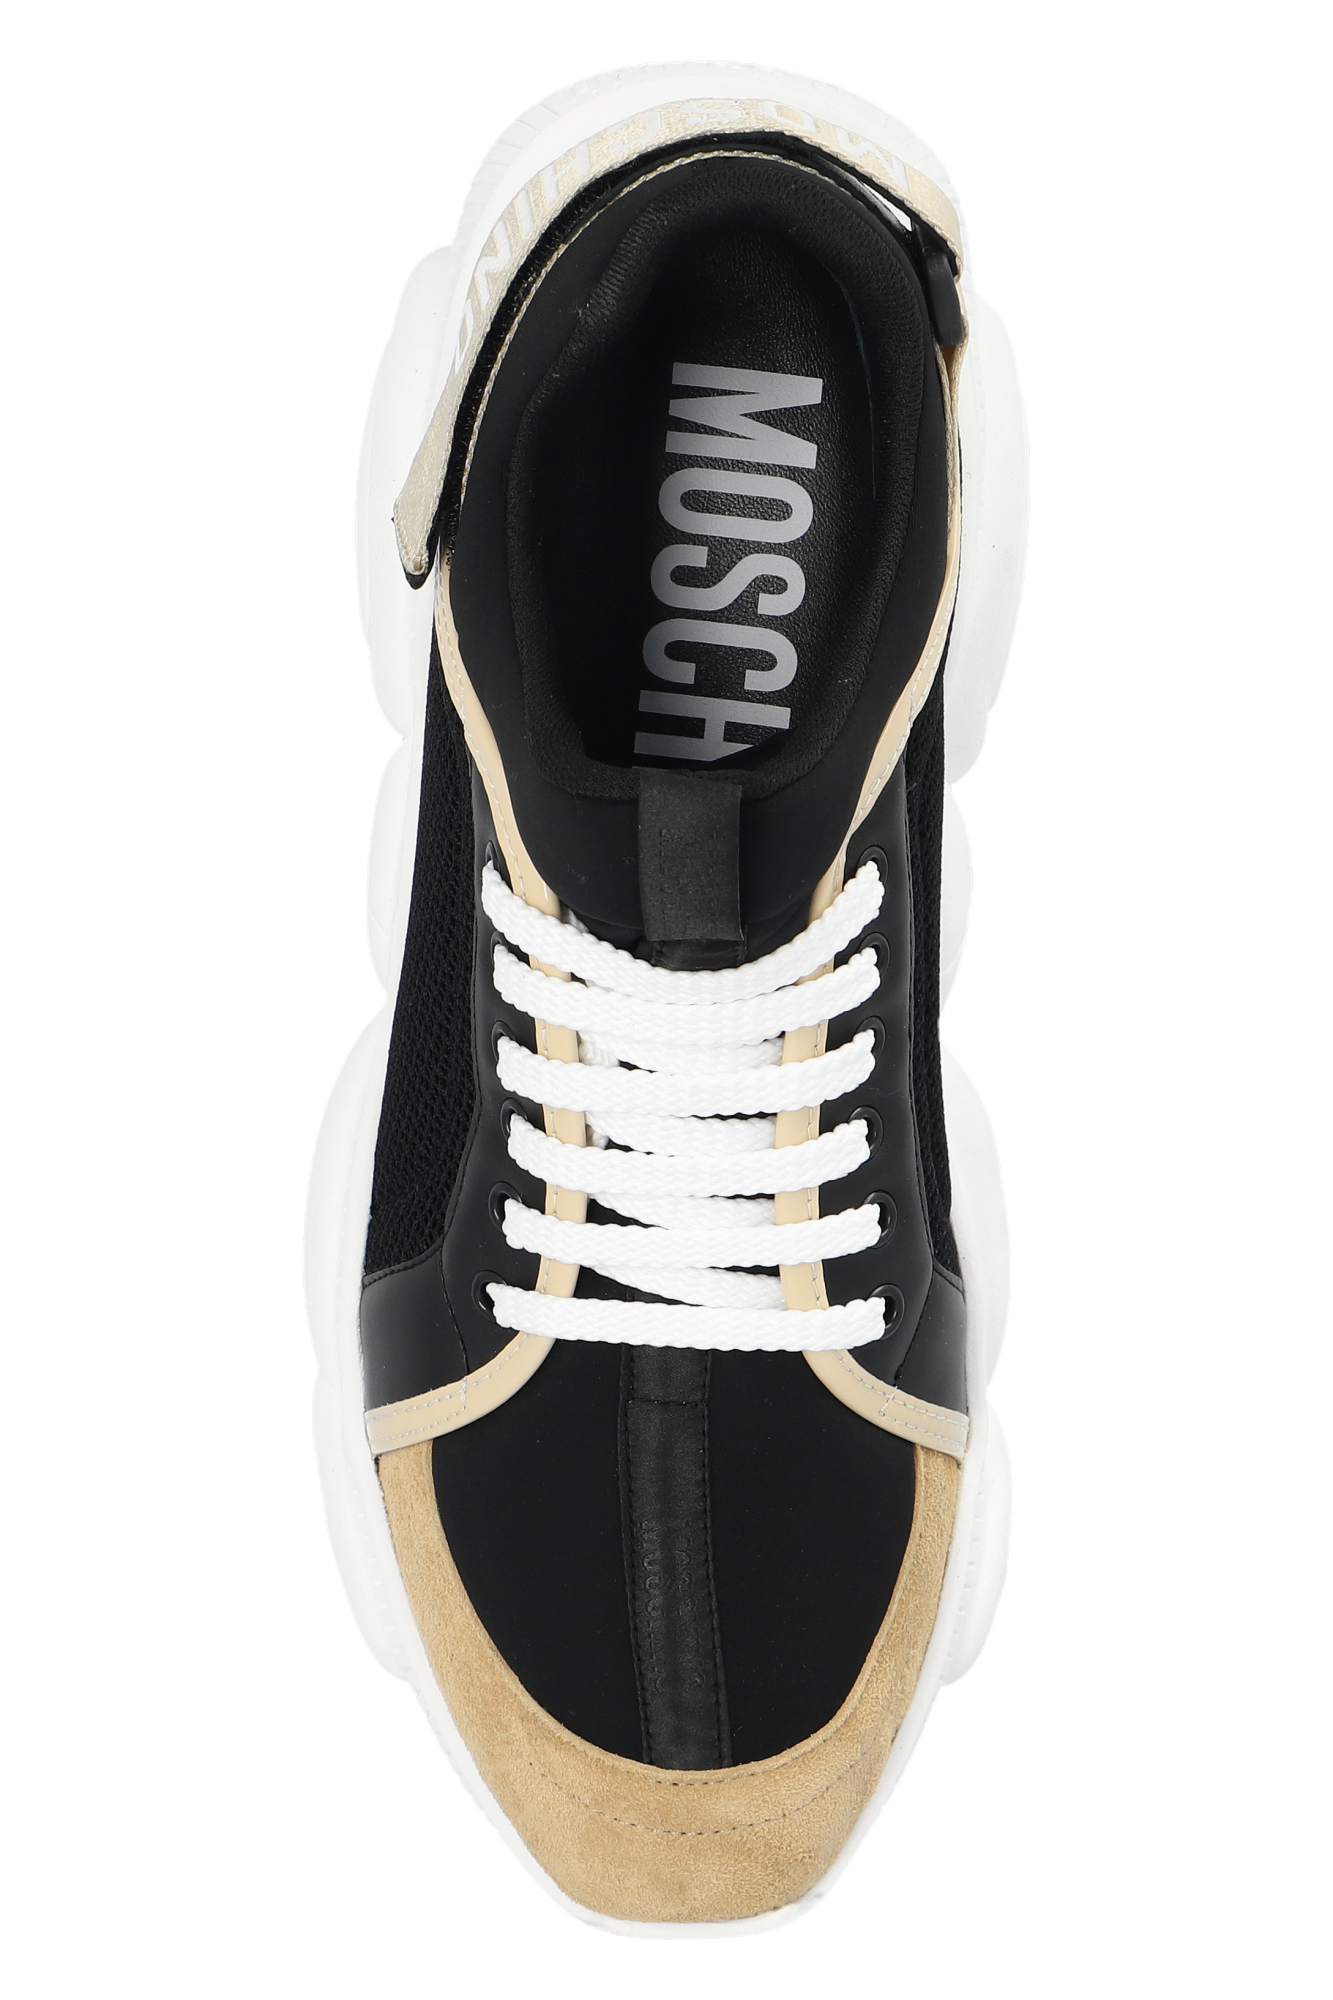 Moschino a sneaker cake recreating the just re-issued